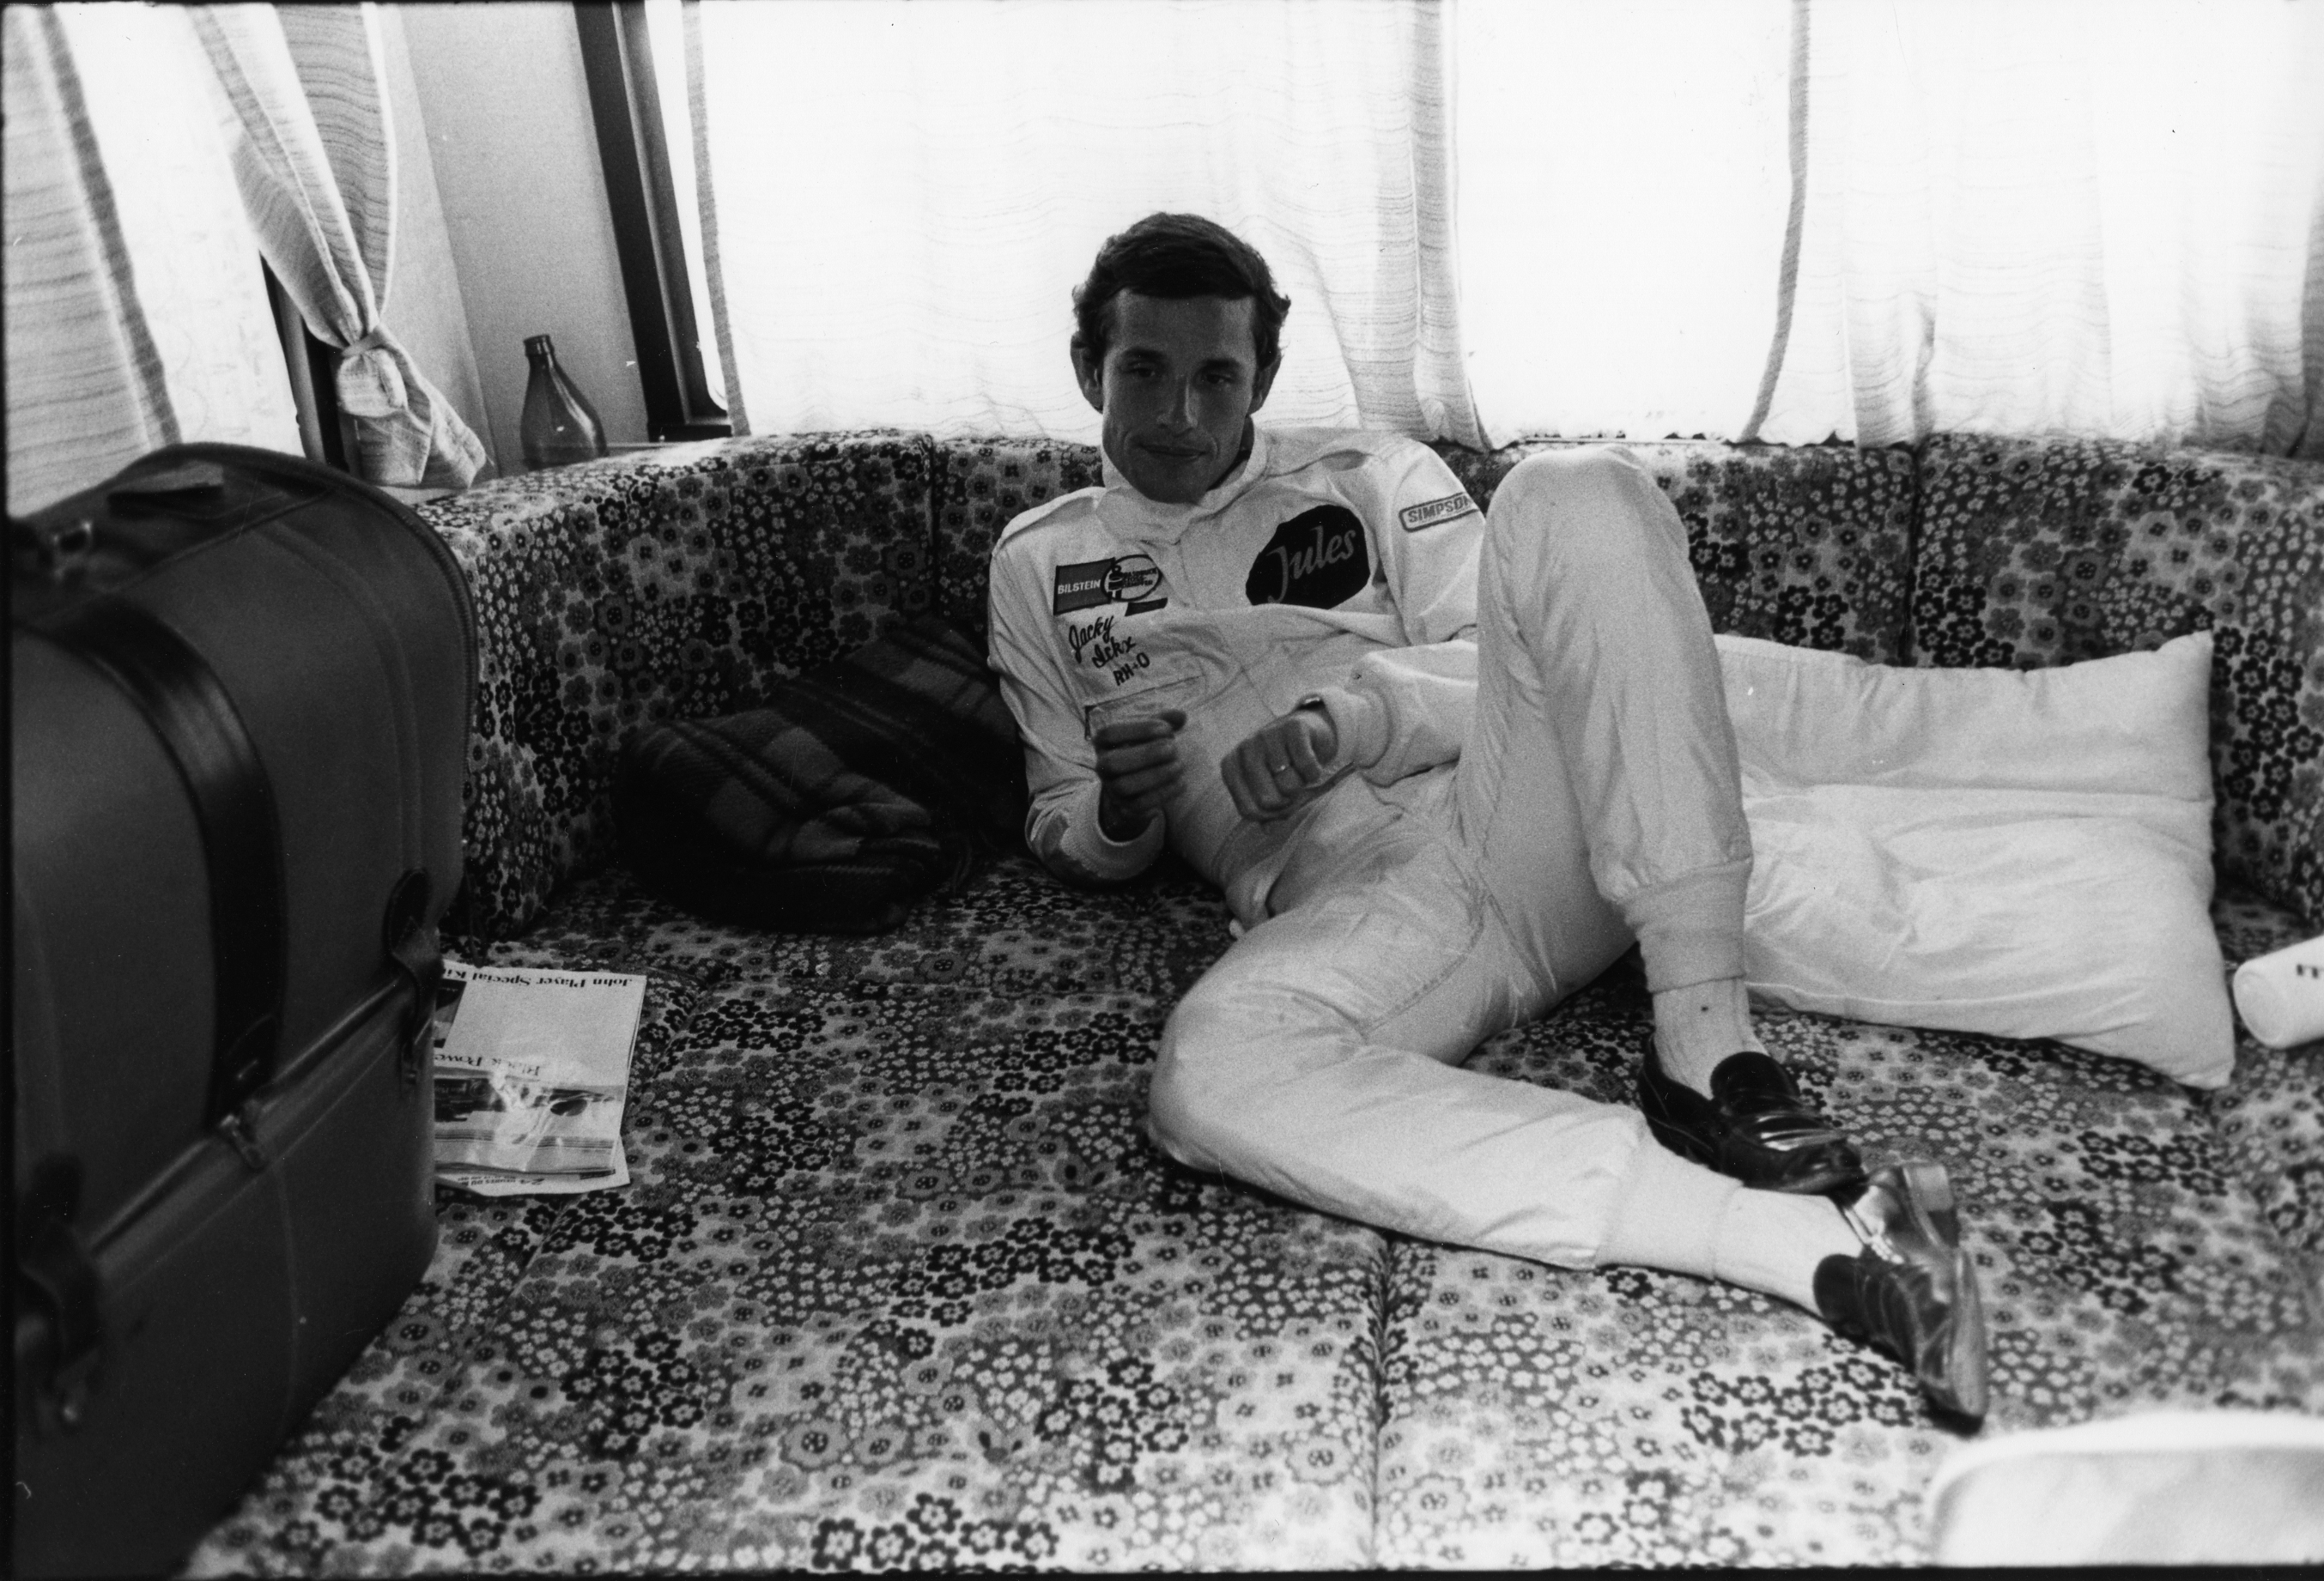 Jacky Ickx is a legend. The original "Mr Le Mans" before Tom Kristensen, scored the pole five times (1975, 1978, 1981, 1982 and 1983) and won the 24 Hours six times.